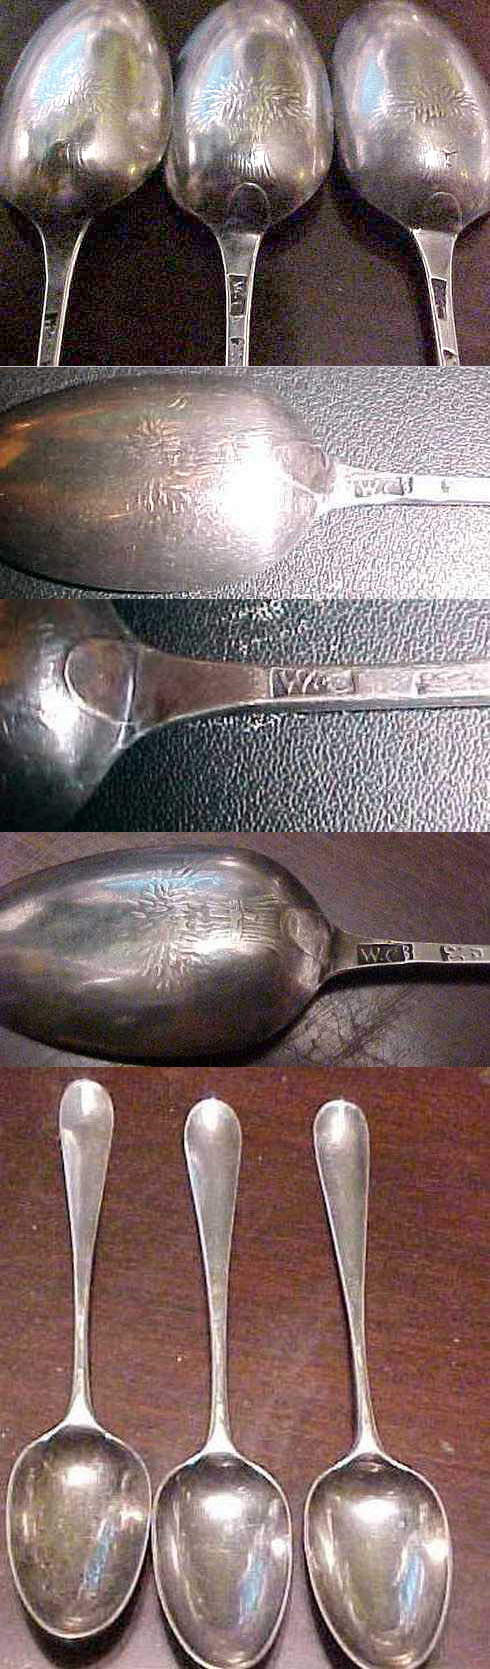 Details about   AMERICAN STERLING unknown Wheat TEA SPOONS 1850-1900 